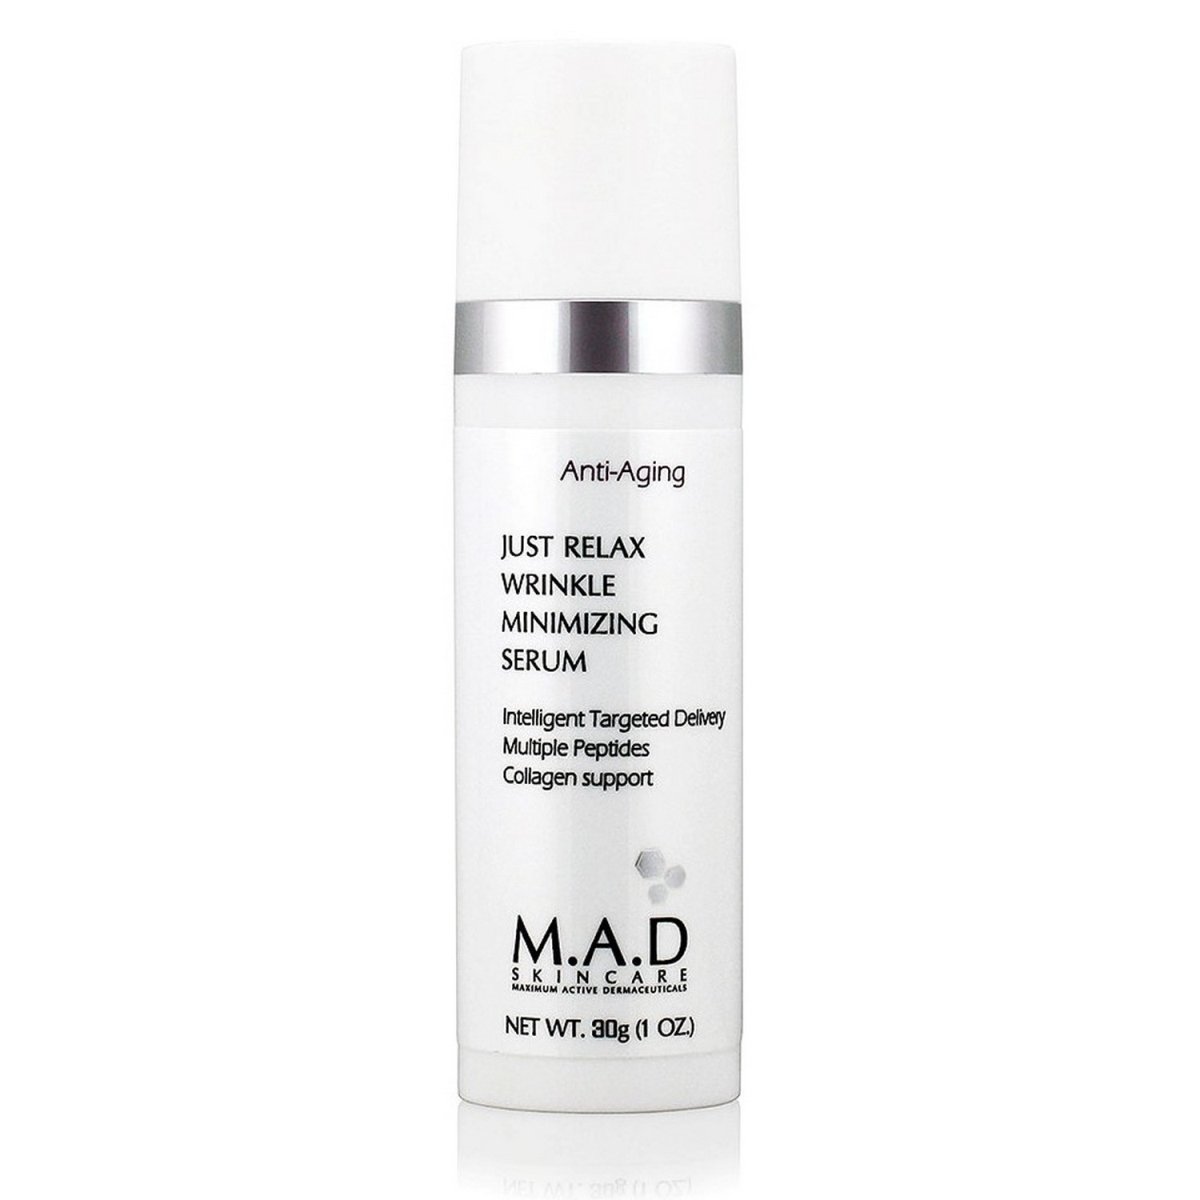 Picture of M.A.D. Skincare 470264 1 oz Just Relax Wrinkle Minimizing Serum